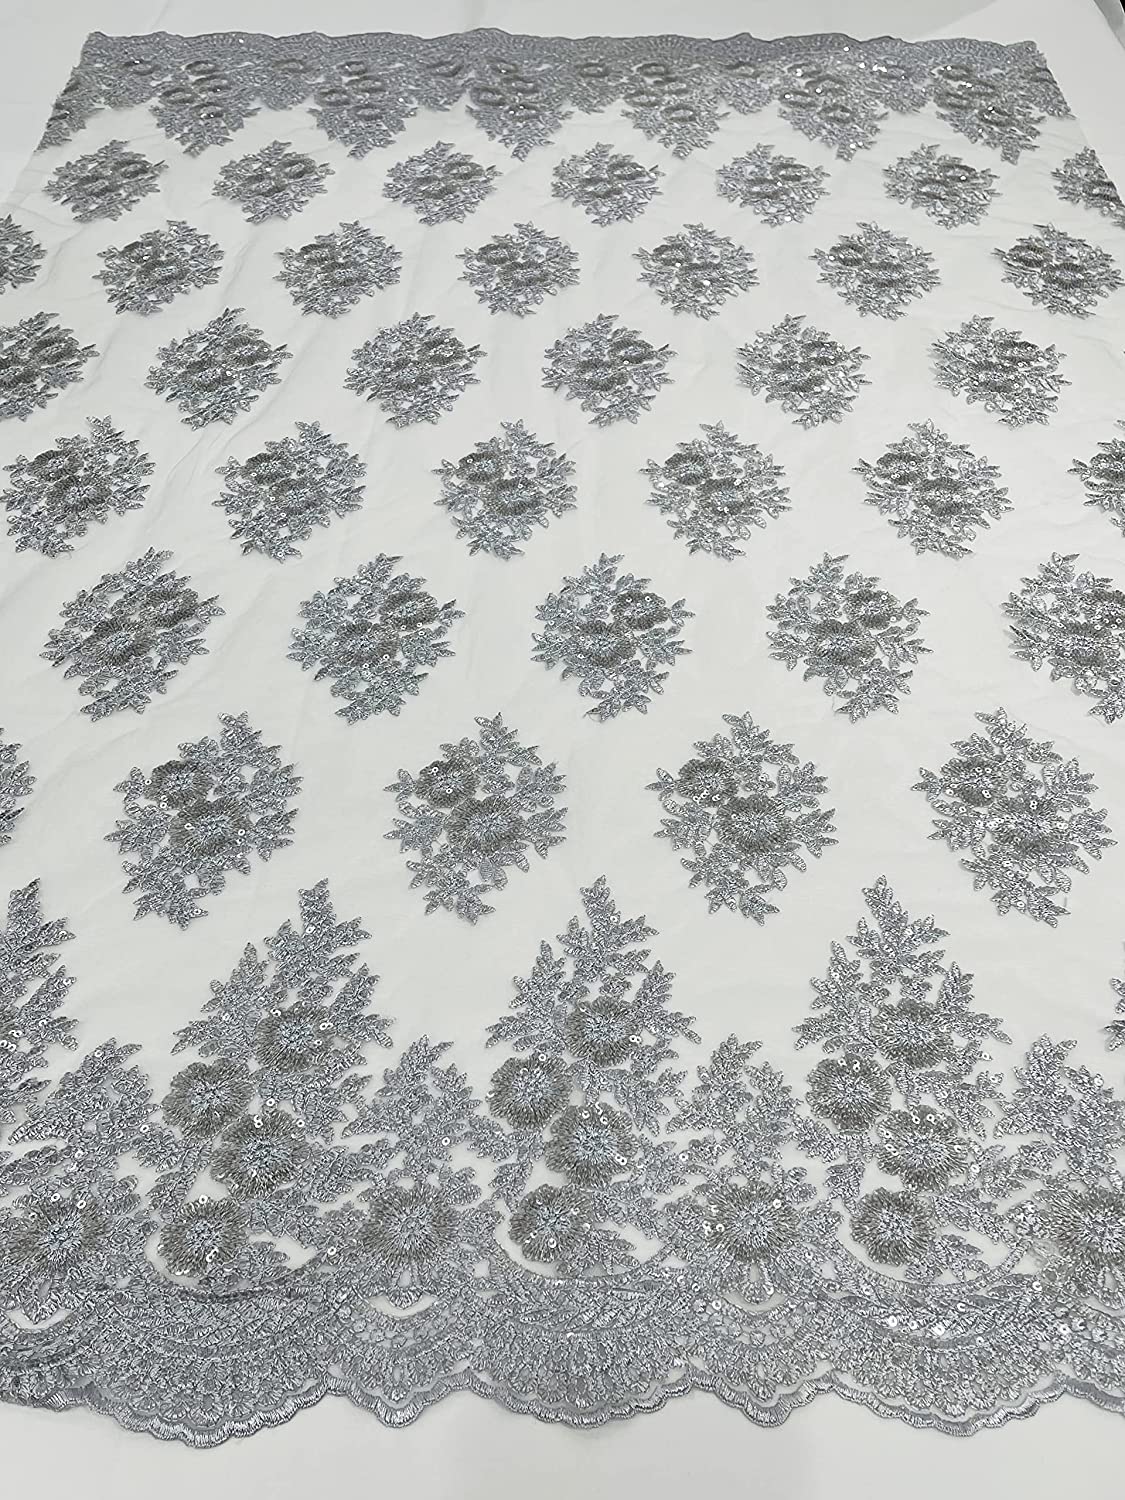 Emma Design Floral Corded Embroider with Sequins, Solid and with Glitter Mesh Lace Fabric (1 Yard, Solid Mesh Silver)